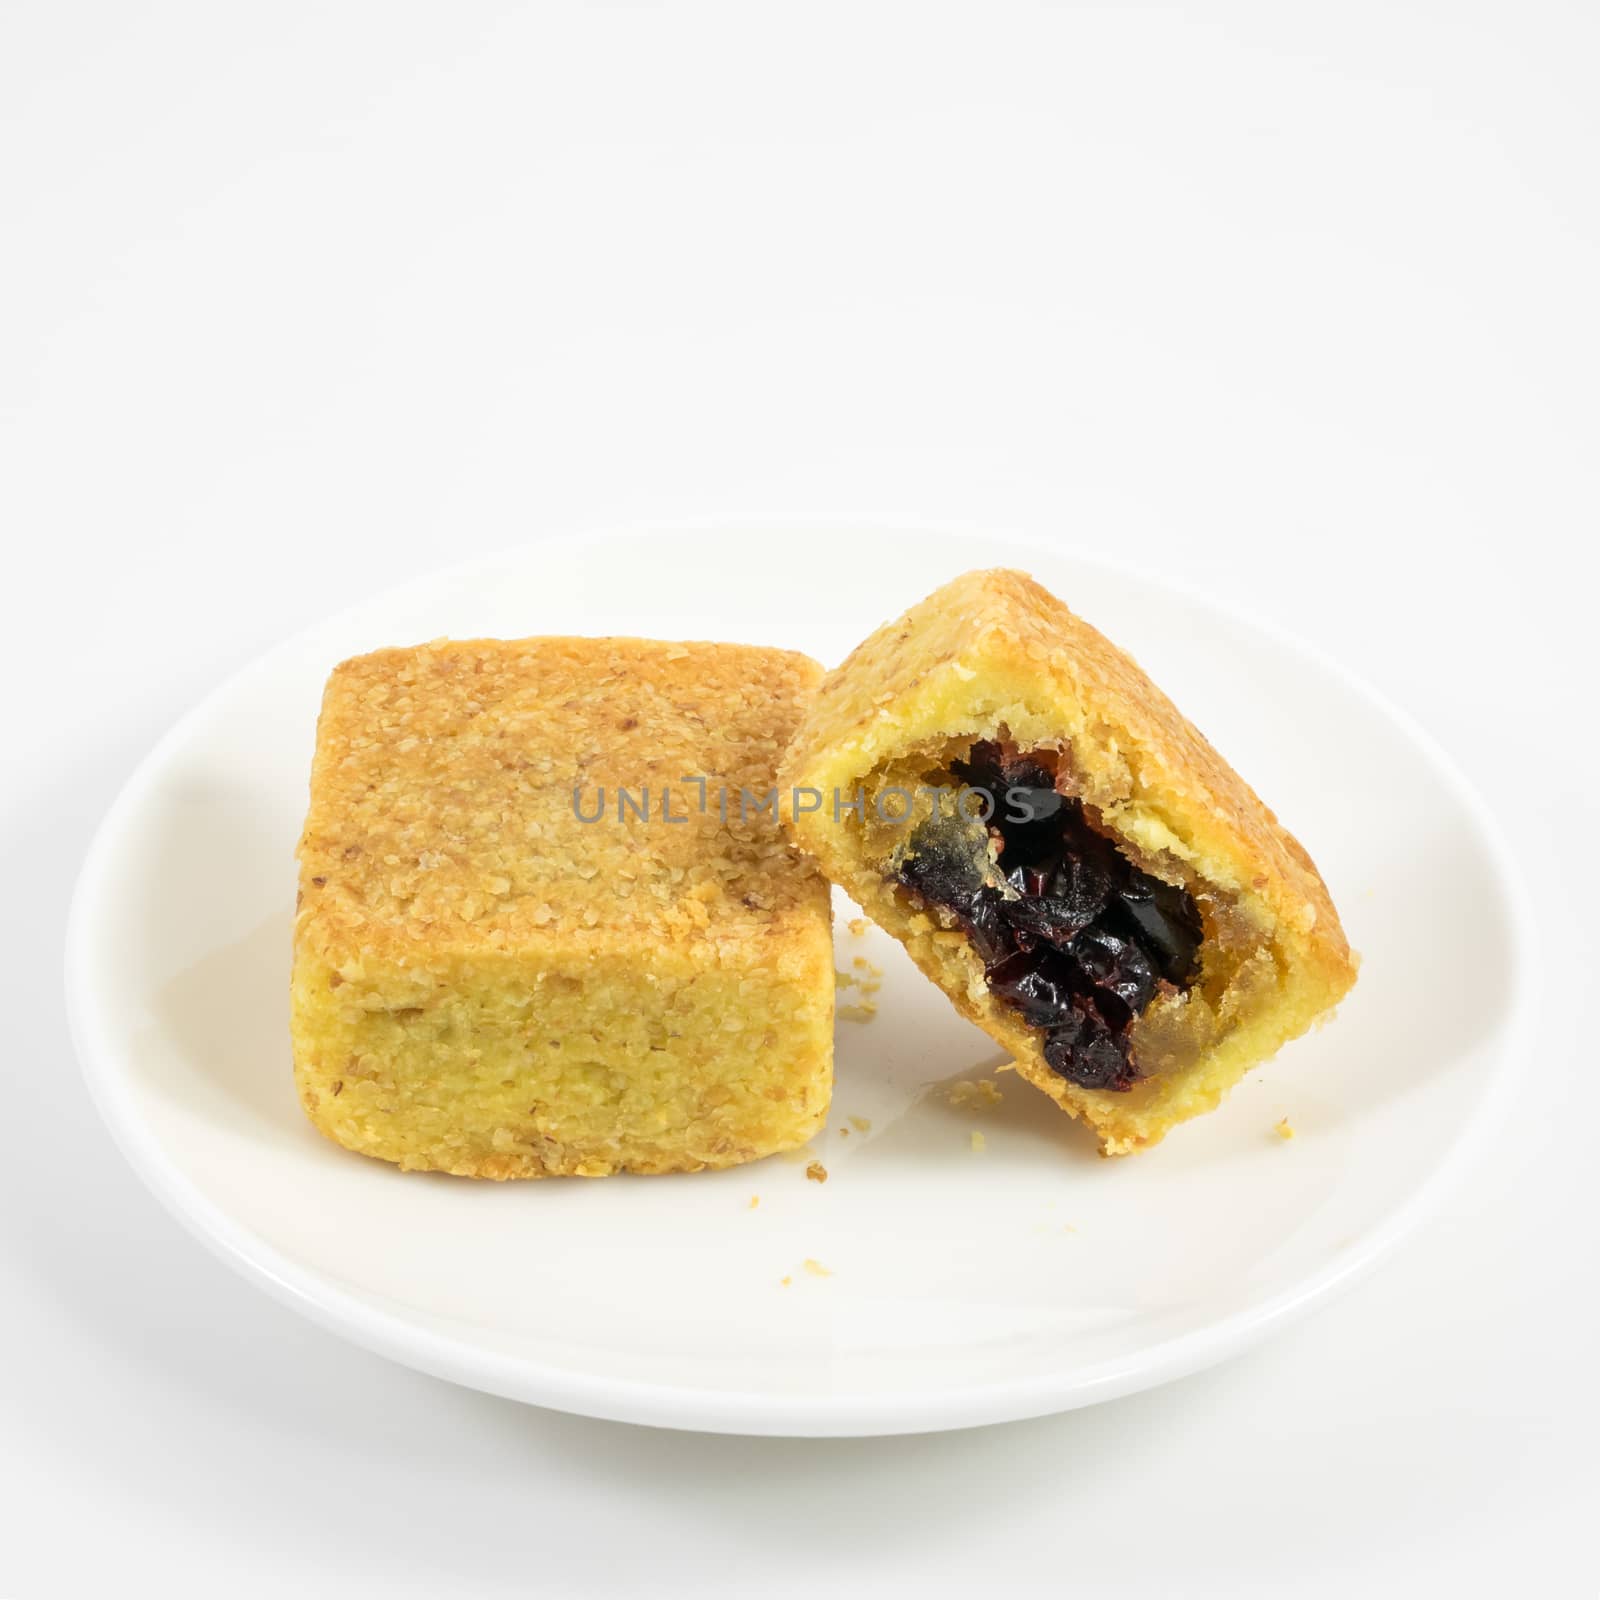 The tasty Taiwanese cranberry pastry cake on the small white dish.